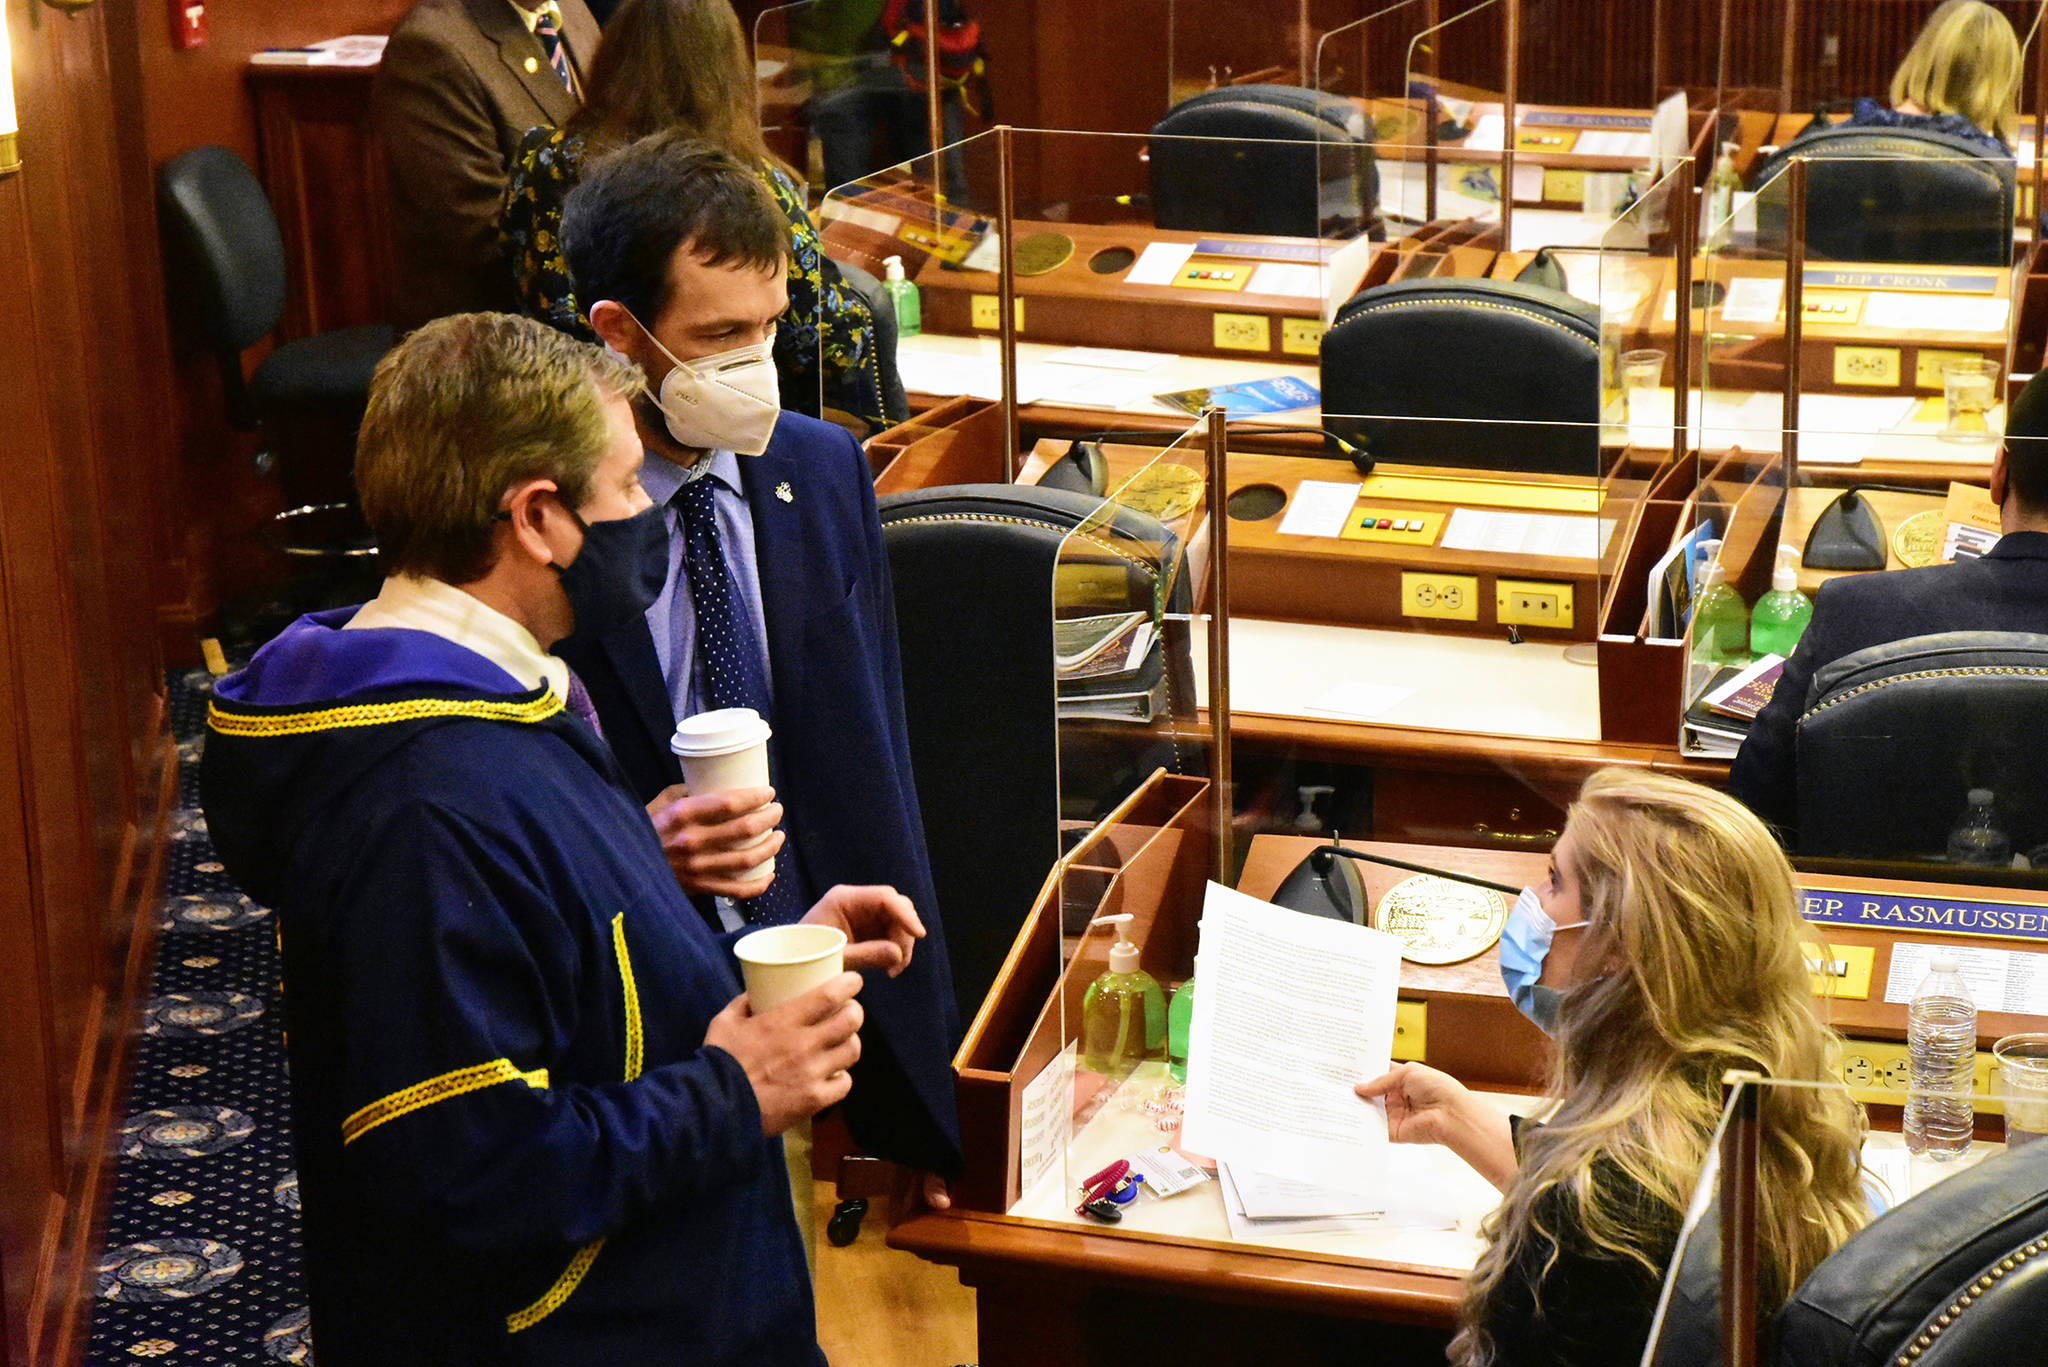 From left to right: Alaska state Reps. Chris Tuck, D-Anchorage, Zack Fields, D-Anchorage, and Sara Rasmussen, R-Anchorage, speak on the Alaska House floor on Friday, March 5, 2021, in Juneau, Alaska. The House passed a so-called Sense of the House on Friday, condemning as inappropriate and objectifying comments Fields had made toward Rasmussen last month. (Peter Segall/The Juneau Empire via AP, Pool)